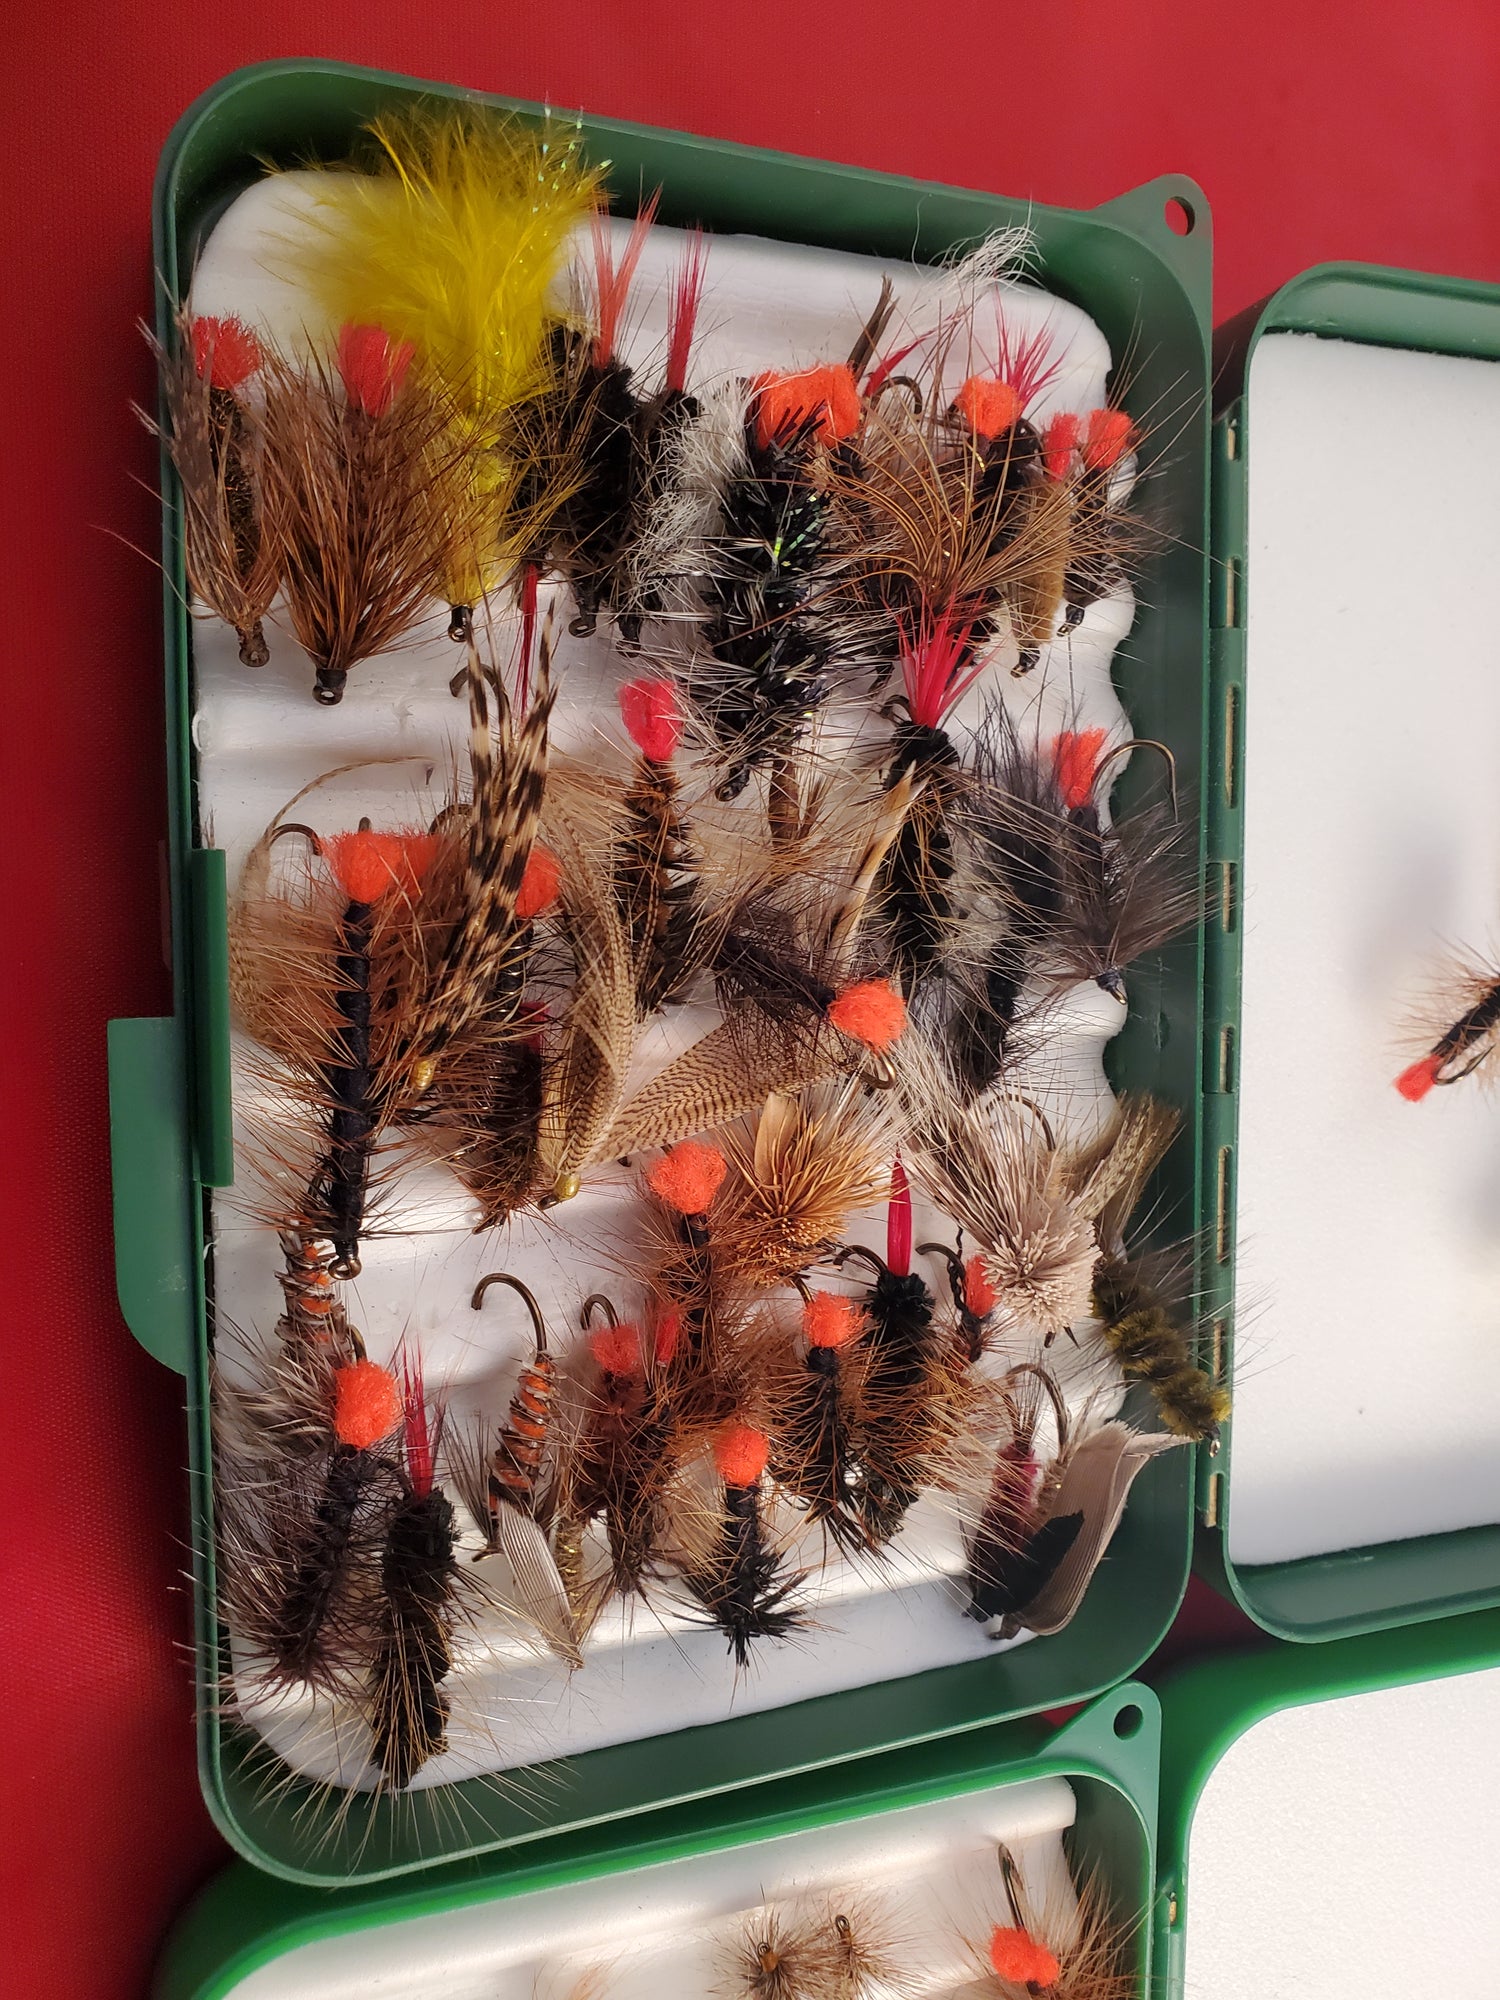 Ralph Graves FISHING FLY , Ralph Graves Collector Fly, Woolly Worm #6 –  Baxter House River Outfitters